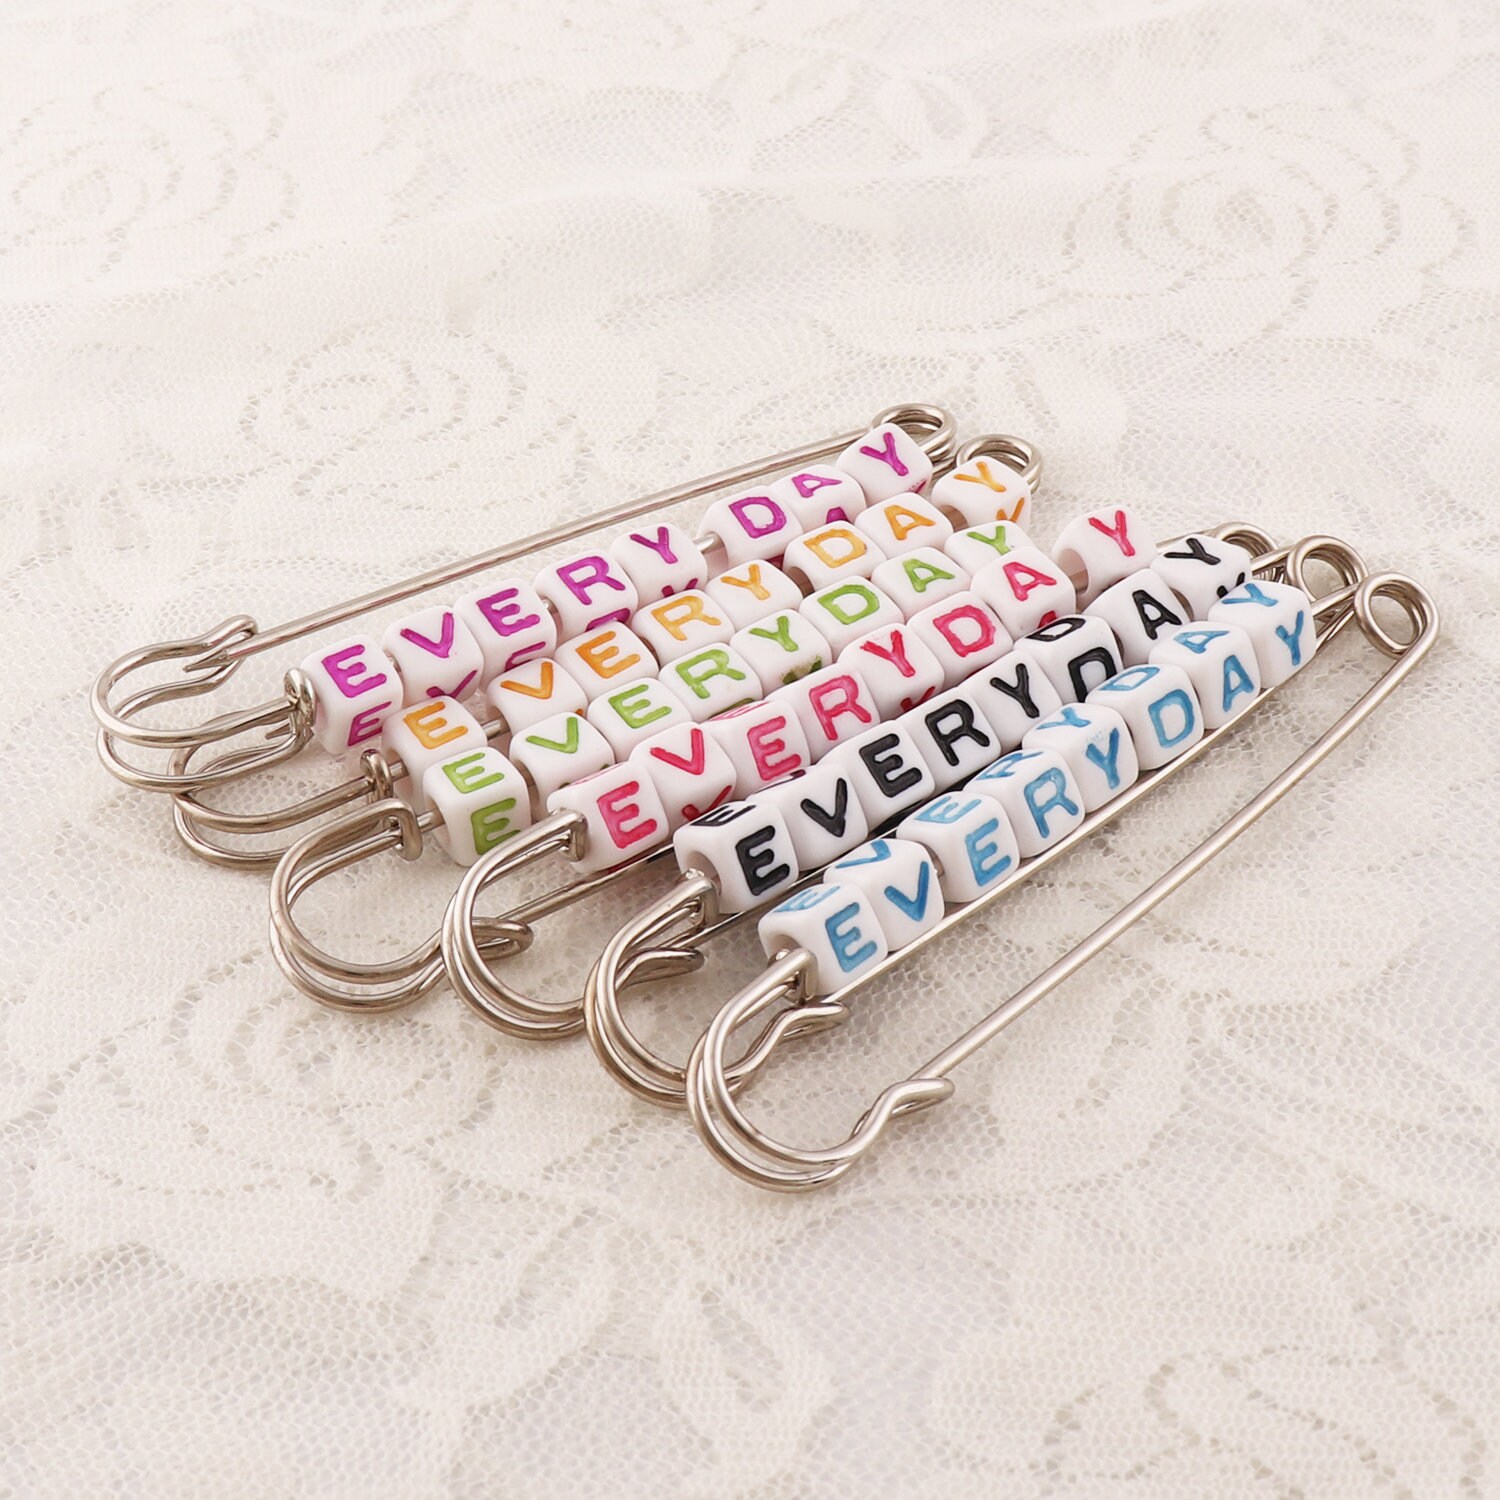 Large Safety Pins, Pin Charms Kilt Pins Safety Pin Brooch Pin Bar Pins  Snail Scrolled Jewelry Findings 30pcs 